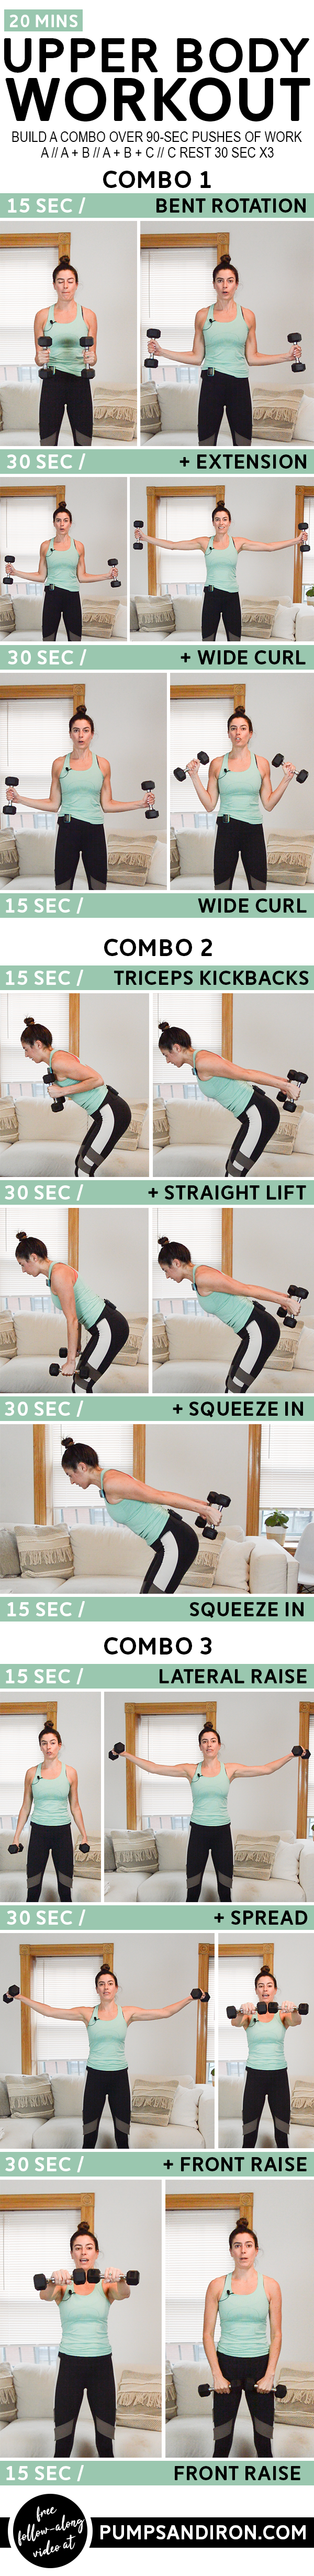 Build-a-Combo Upper Body Workout